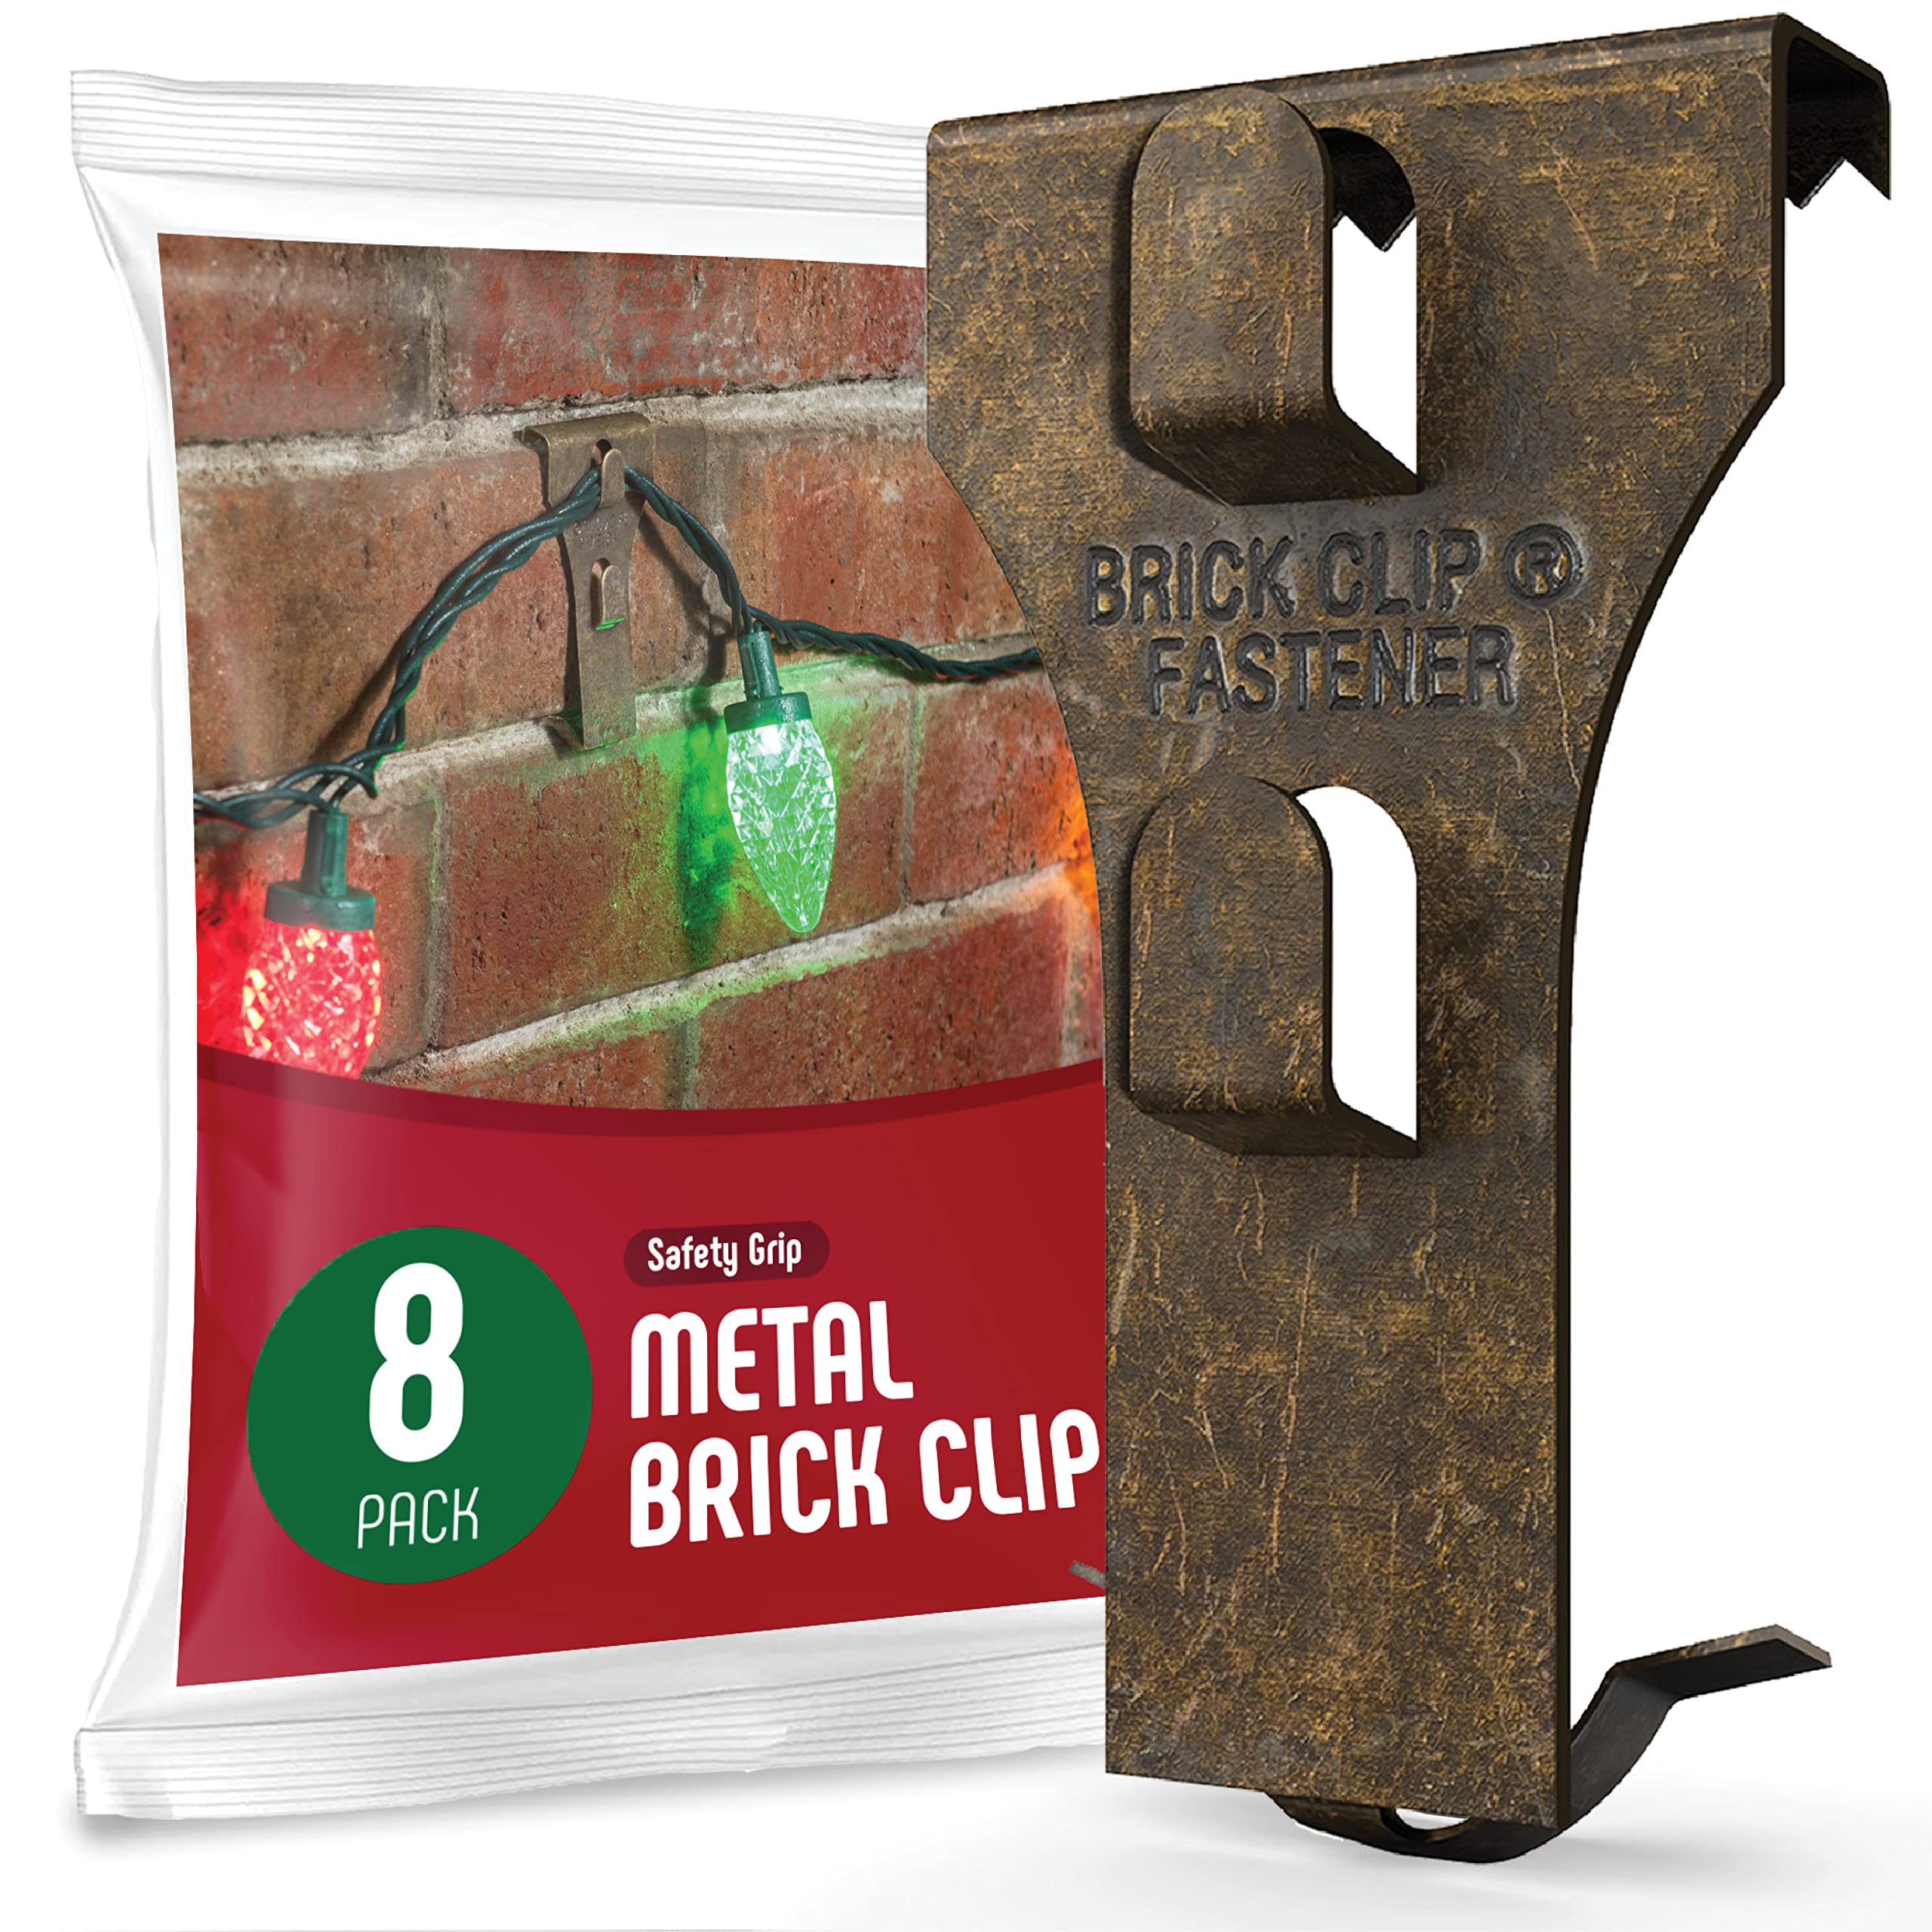 Brick Clips Hanger [Set of 8] Metal Brick Clip for Hanging Outdoors, Hanging Wreaths, Hanging Garlands, Hanging Lights, Hanging Wall Pictures & All Decor Hanging - Holds Up to 25 Pounds - Made in USA  - Like New